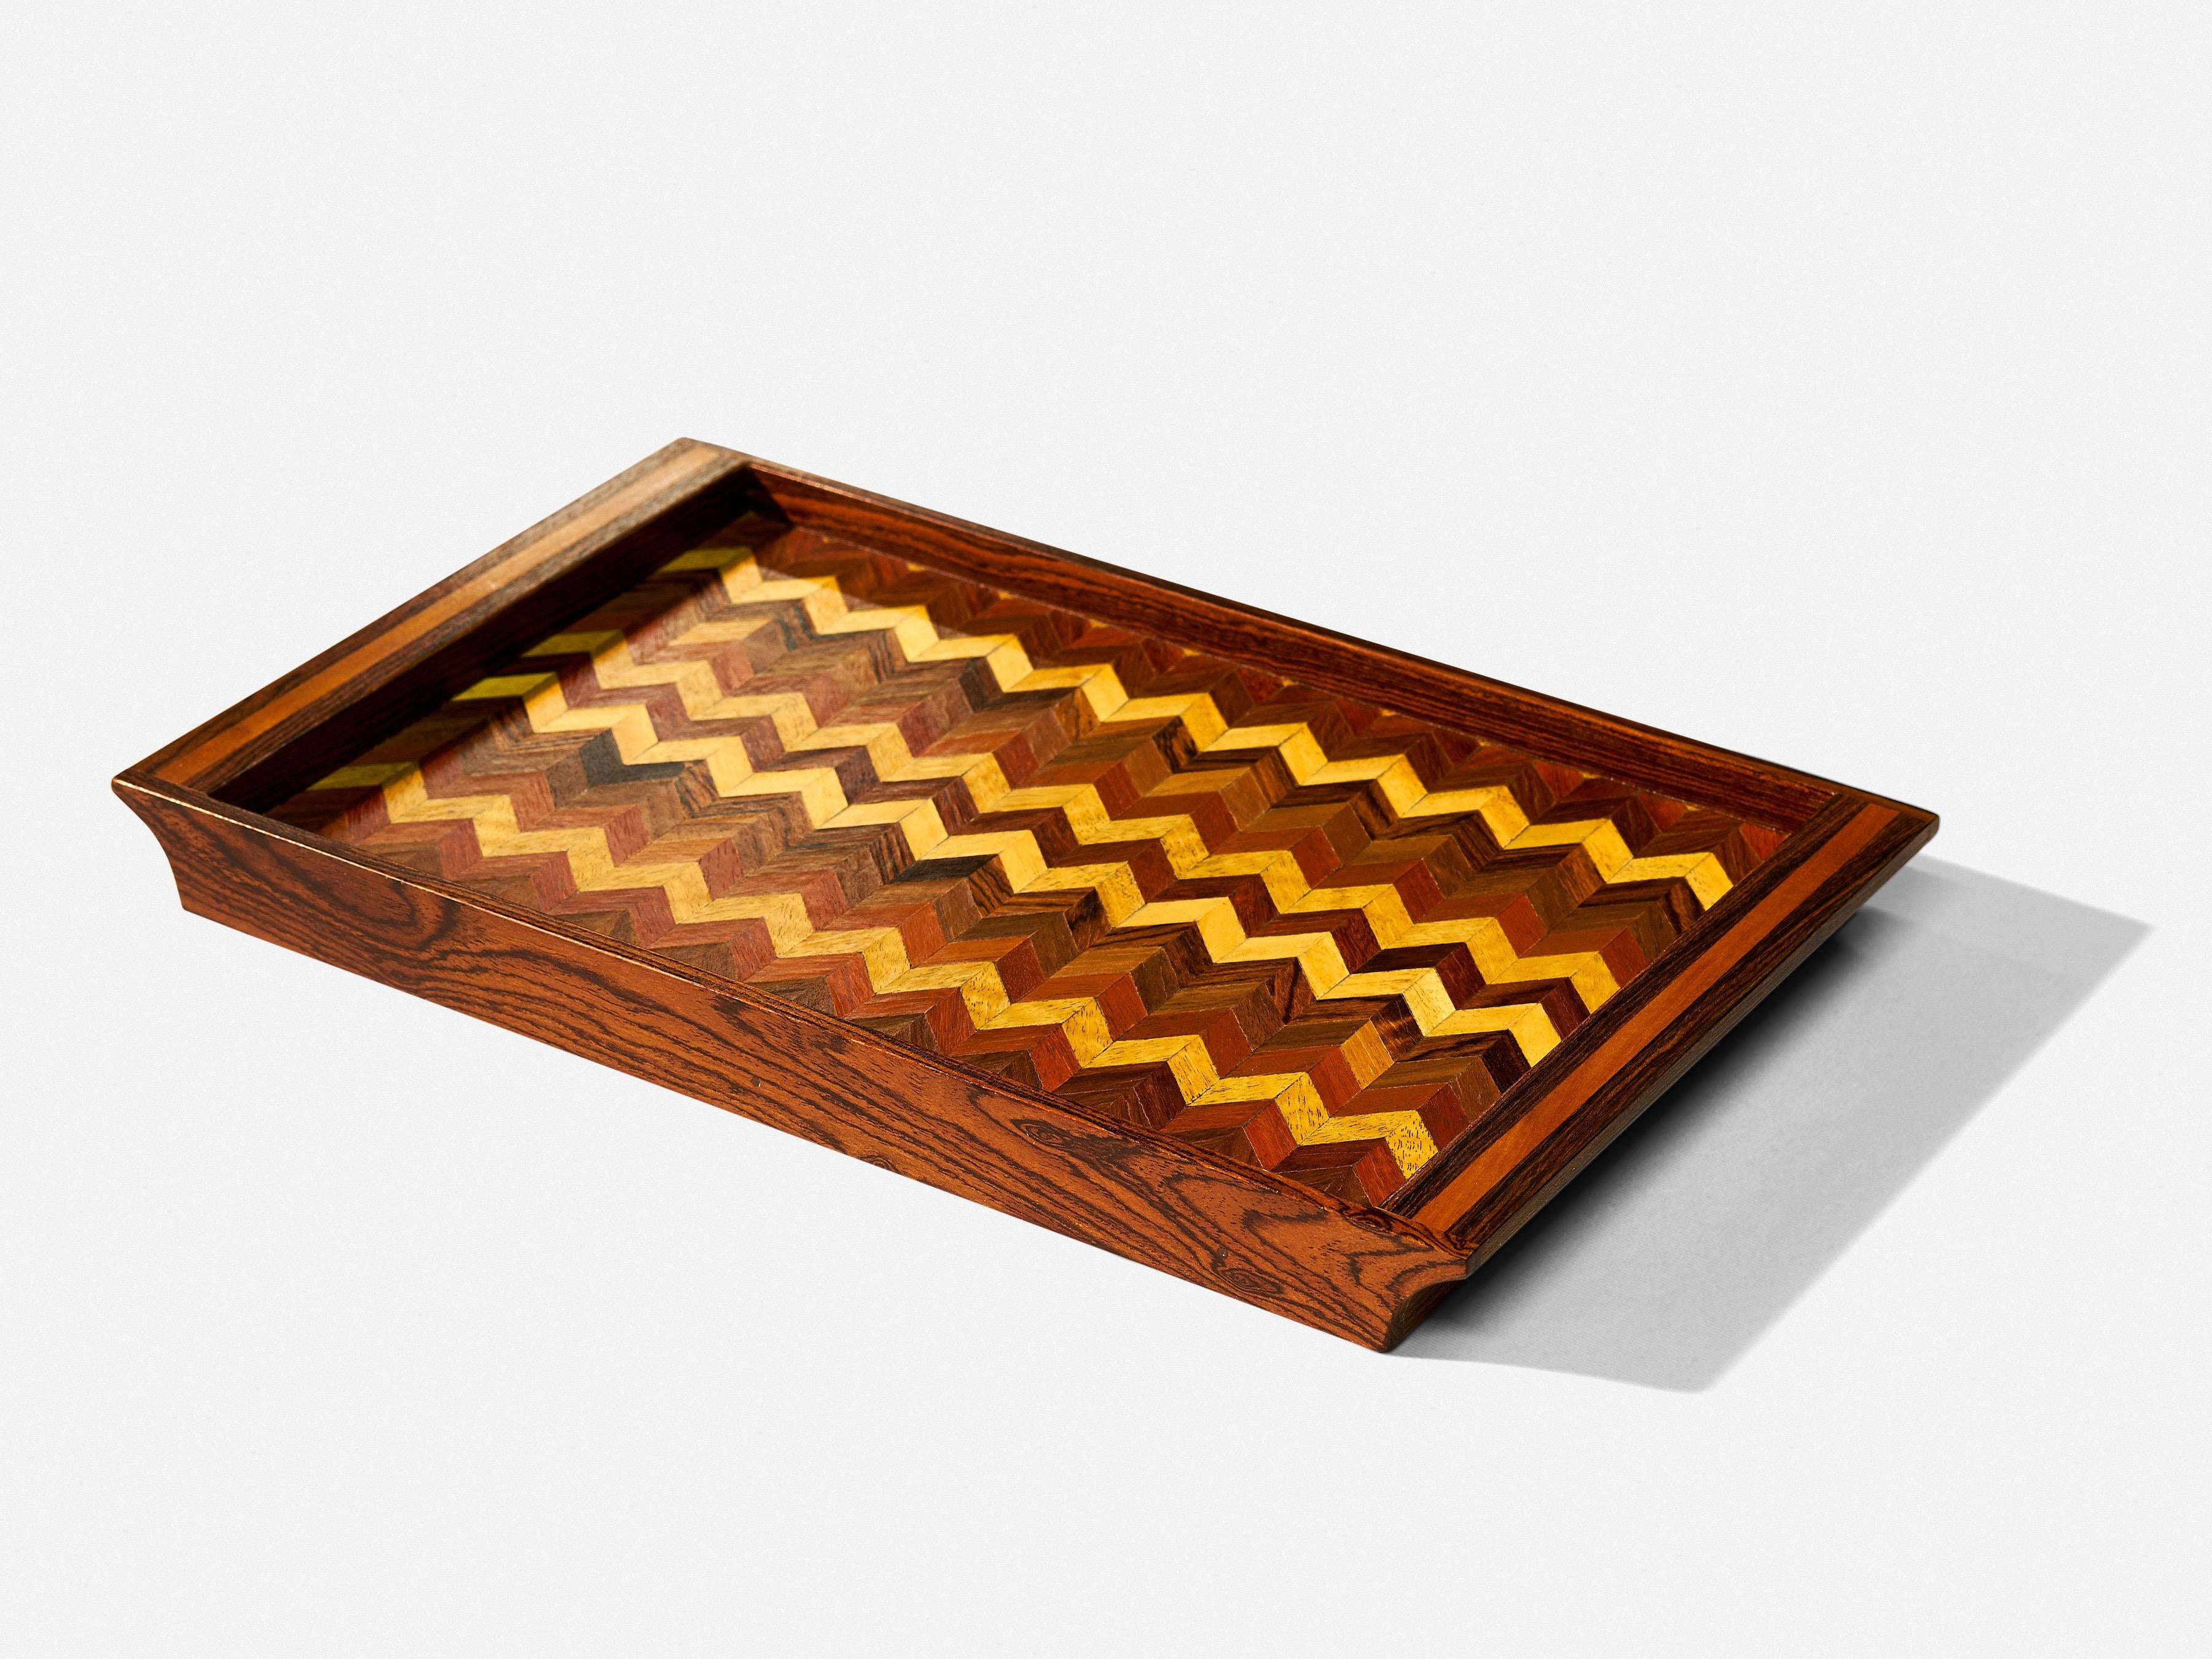 Don shoemaker mixed woods tray by Senàl, circa 1960.

Chevron pattern of mixed exotic wood species trimmed in rosewood.

Excellent vintage condition.

Measures: 22” x 15” x 1.25.